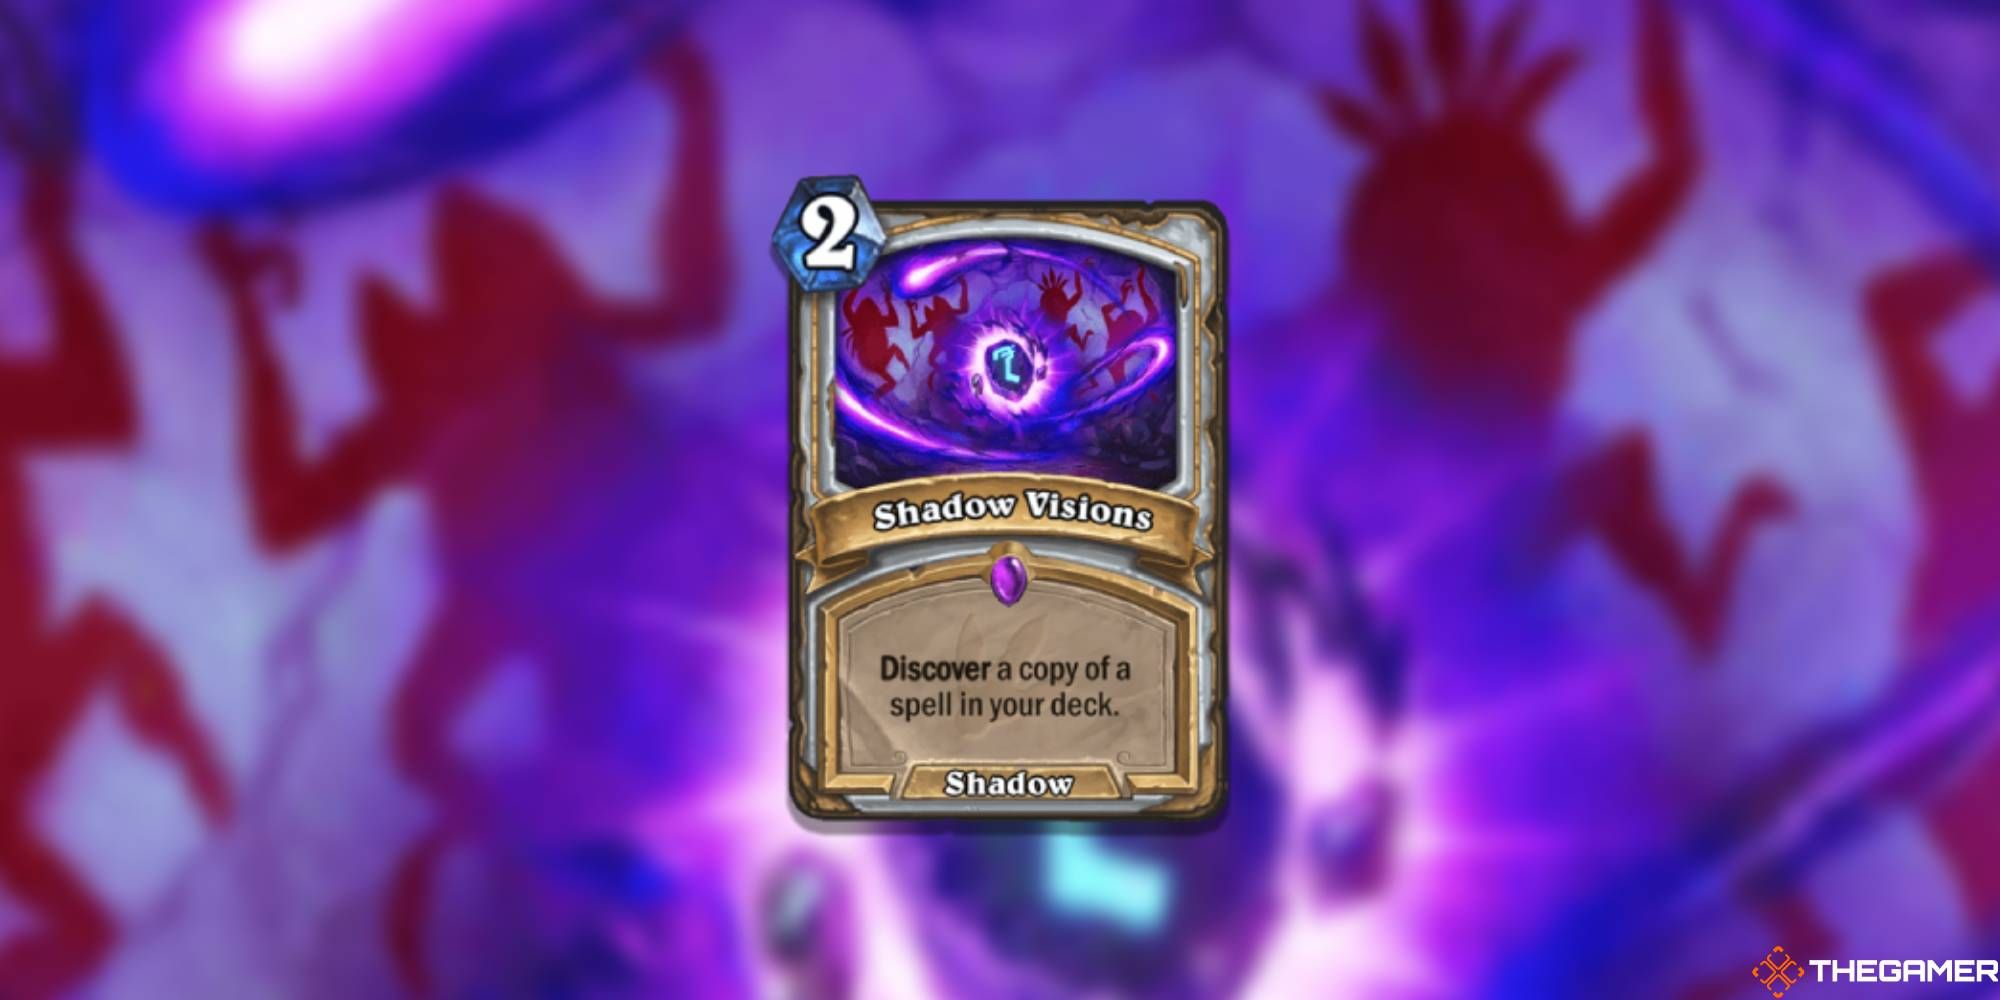 Hearthstone Wild Cards Shadow Visions Discover copy spell